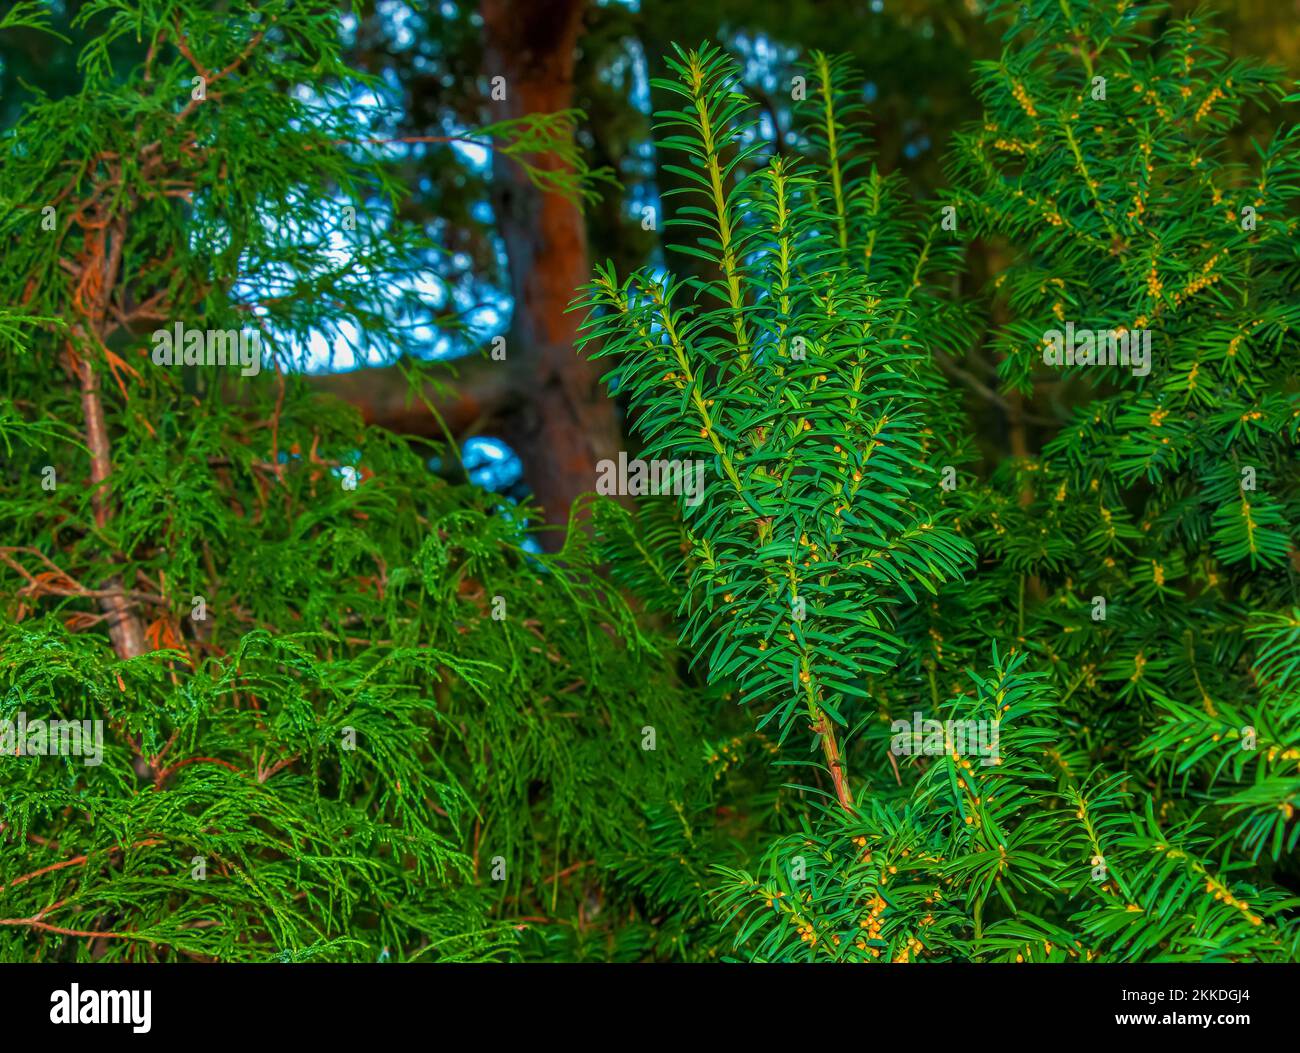 Yew tree with red fruits. Taxus baccata Fastigiata. Branch with mature berries. Red berries growing on evergreen yew tree branches. European yew tree Stock Photo